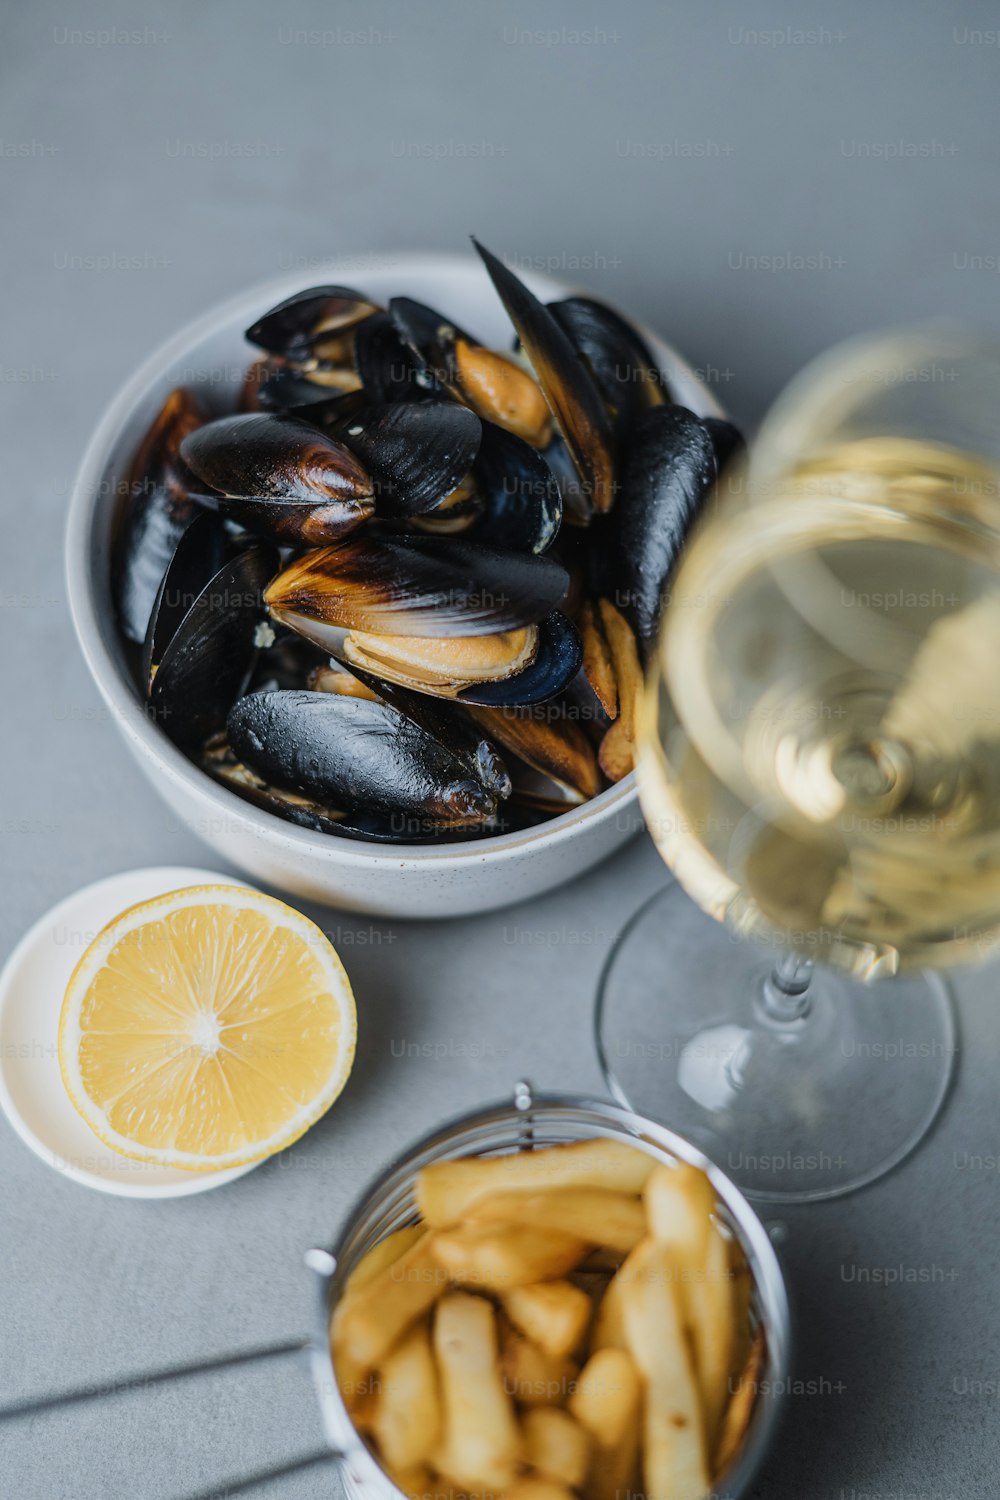 a bowl of mussels next to a glass of wine